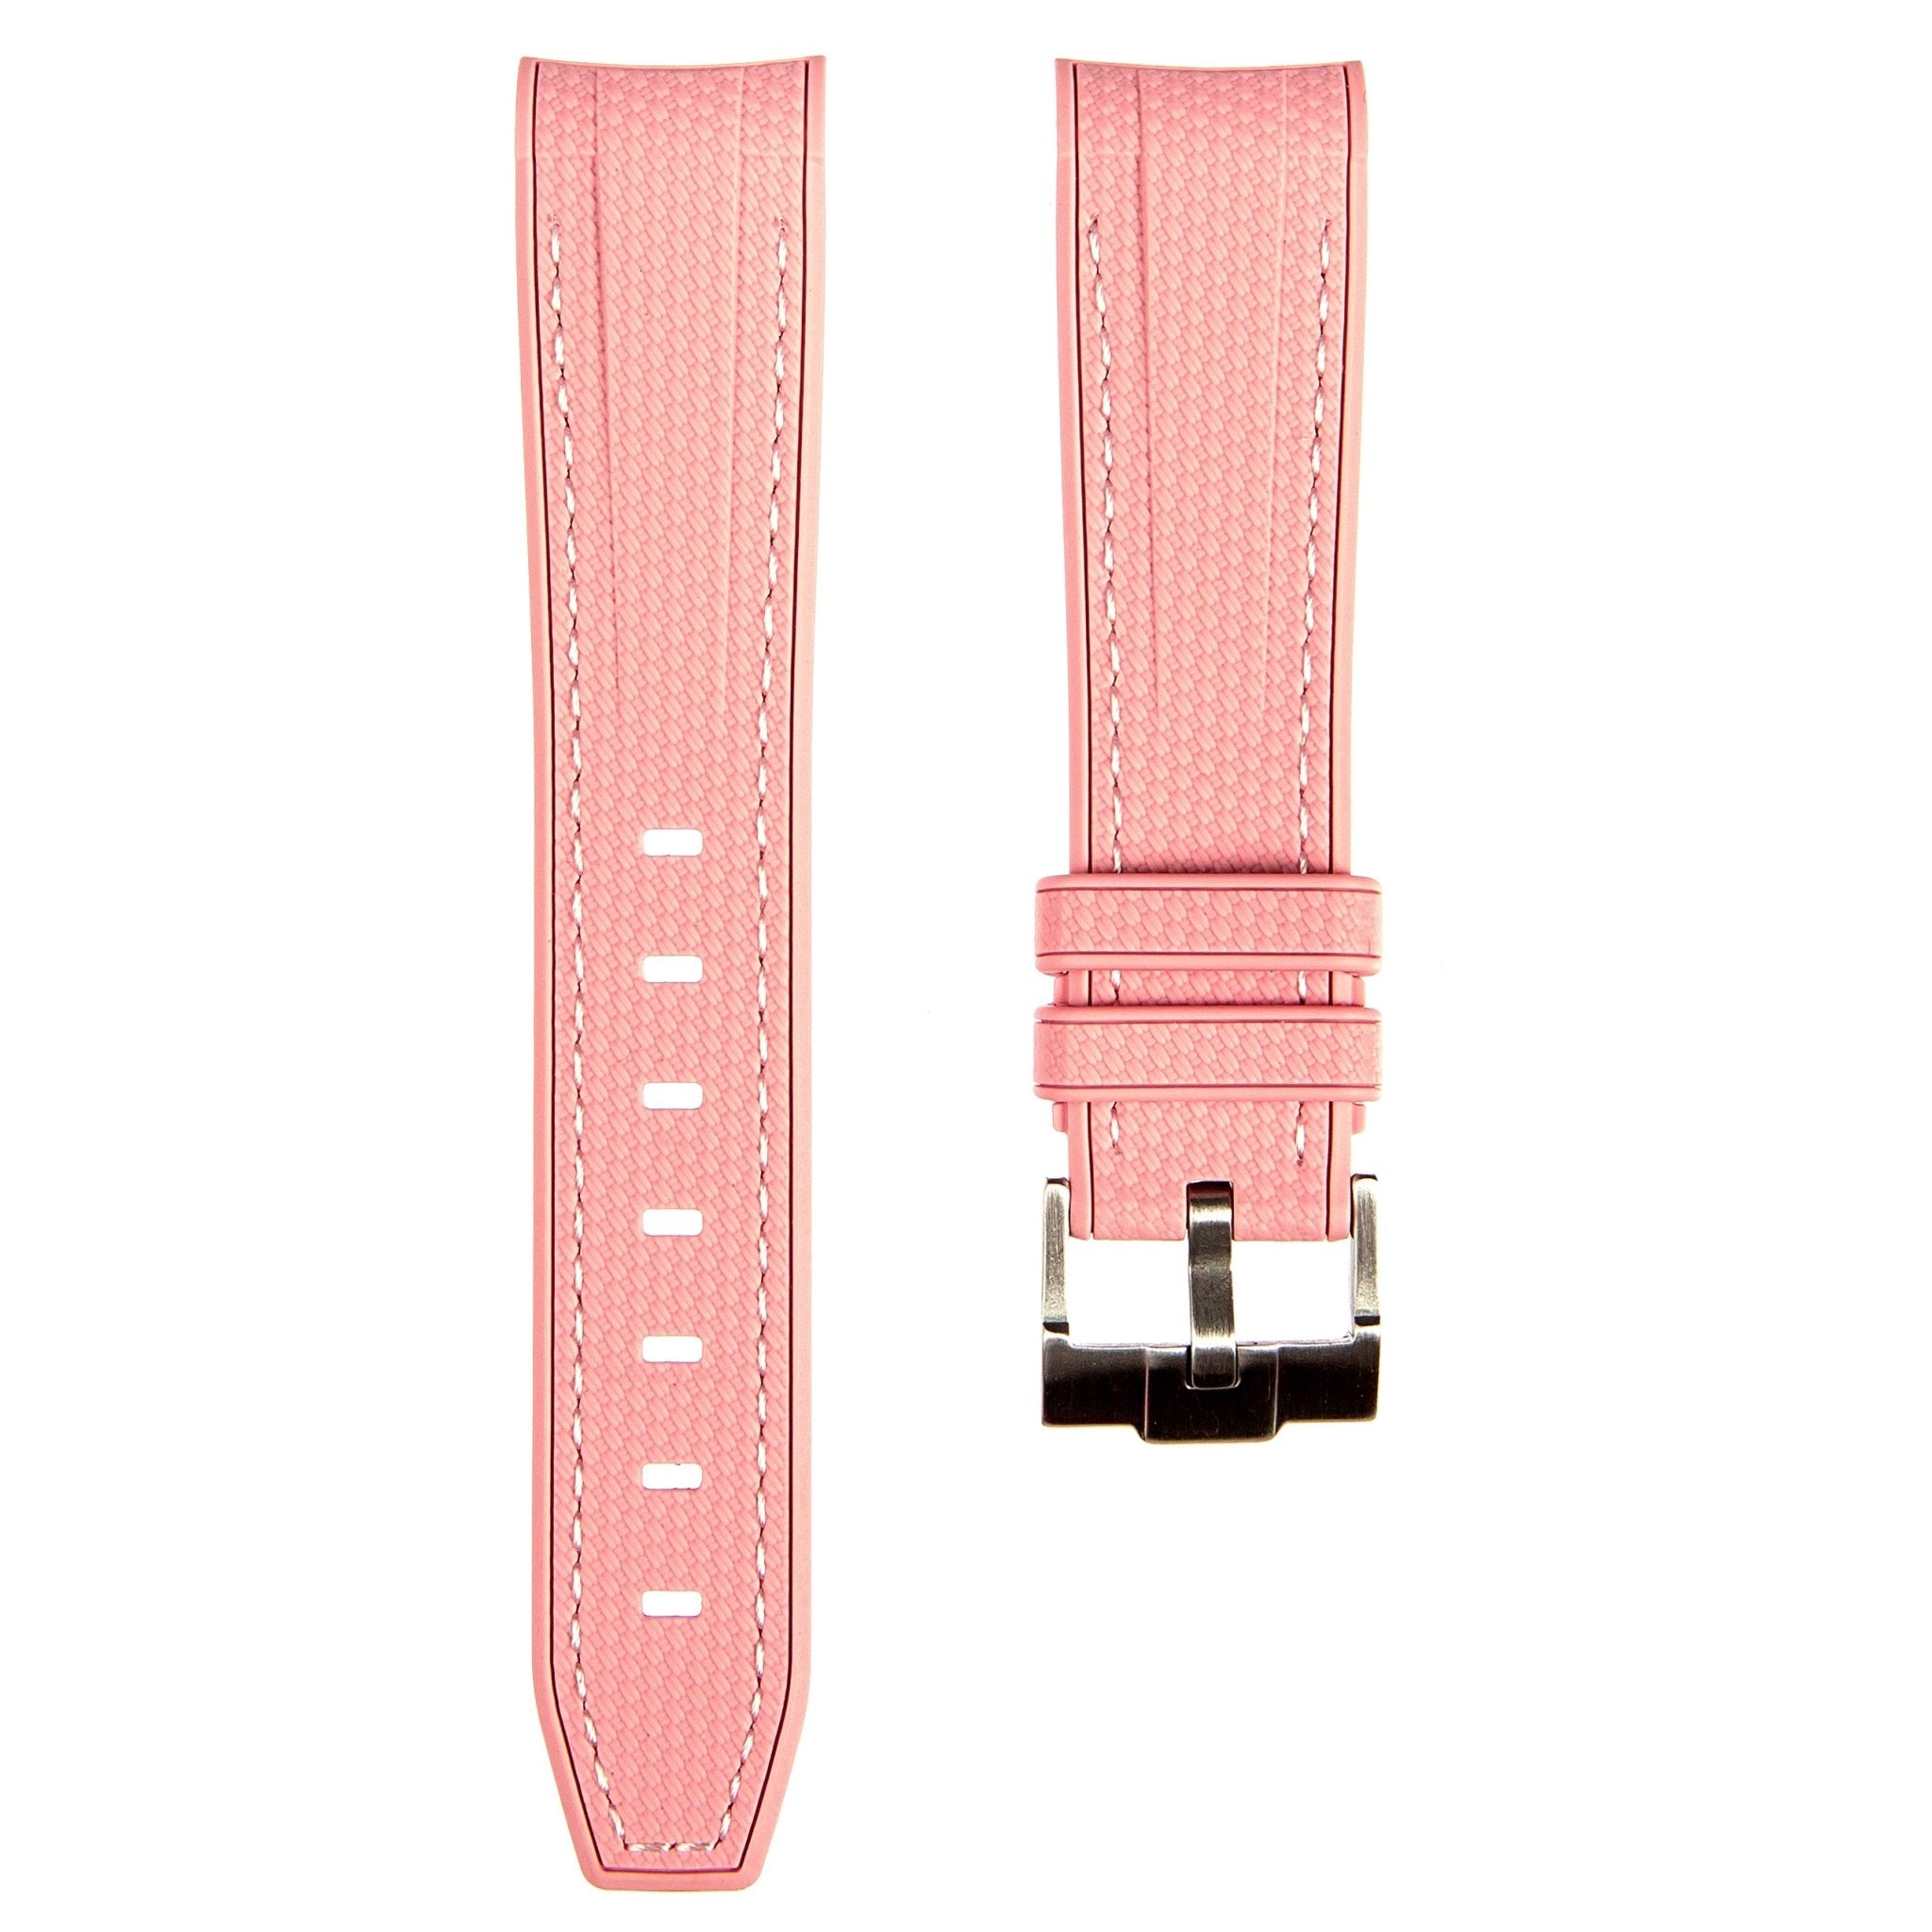 Textured Curved End Premium Silicone Strap - Light Pink (2405) -StrapSeeker